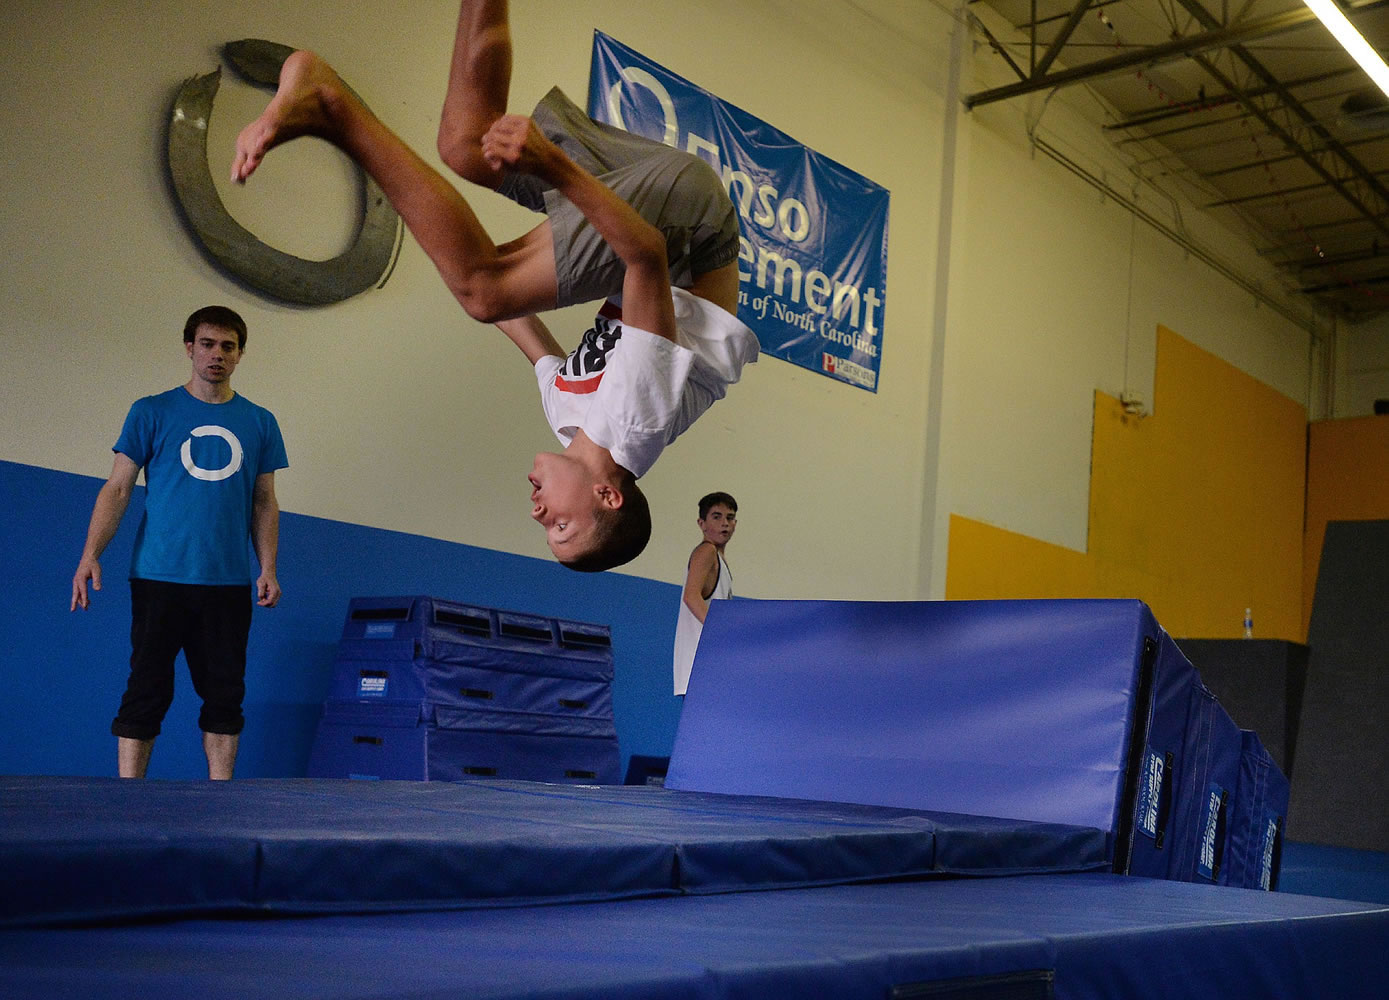 Jacob Wells, 14, does a flip during a Parkour workout in August in Raleigh, N.C. Parkour is a holistic training discipline using movement that developed from military obstacle course training.